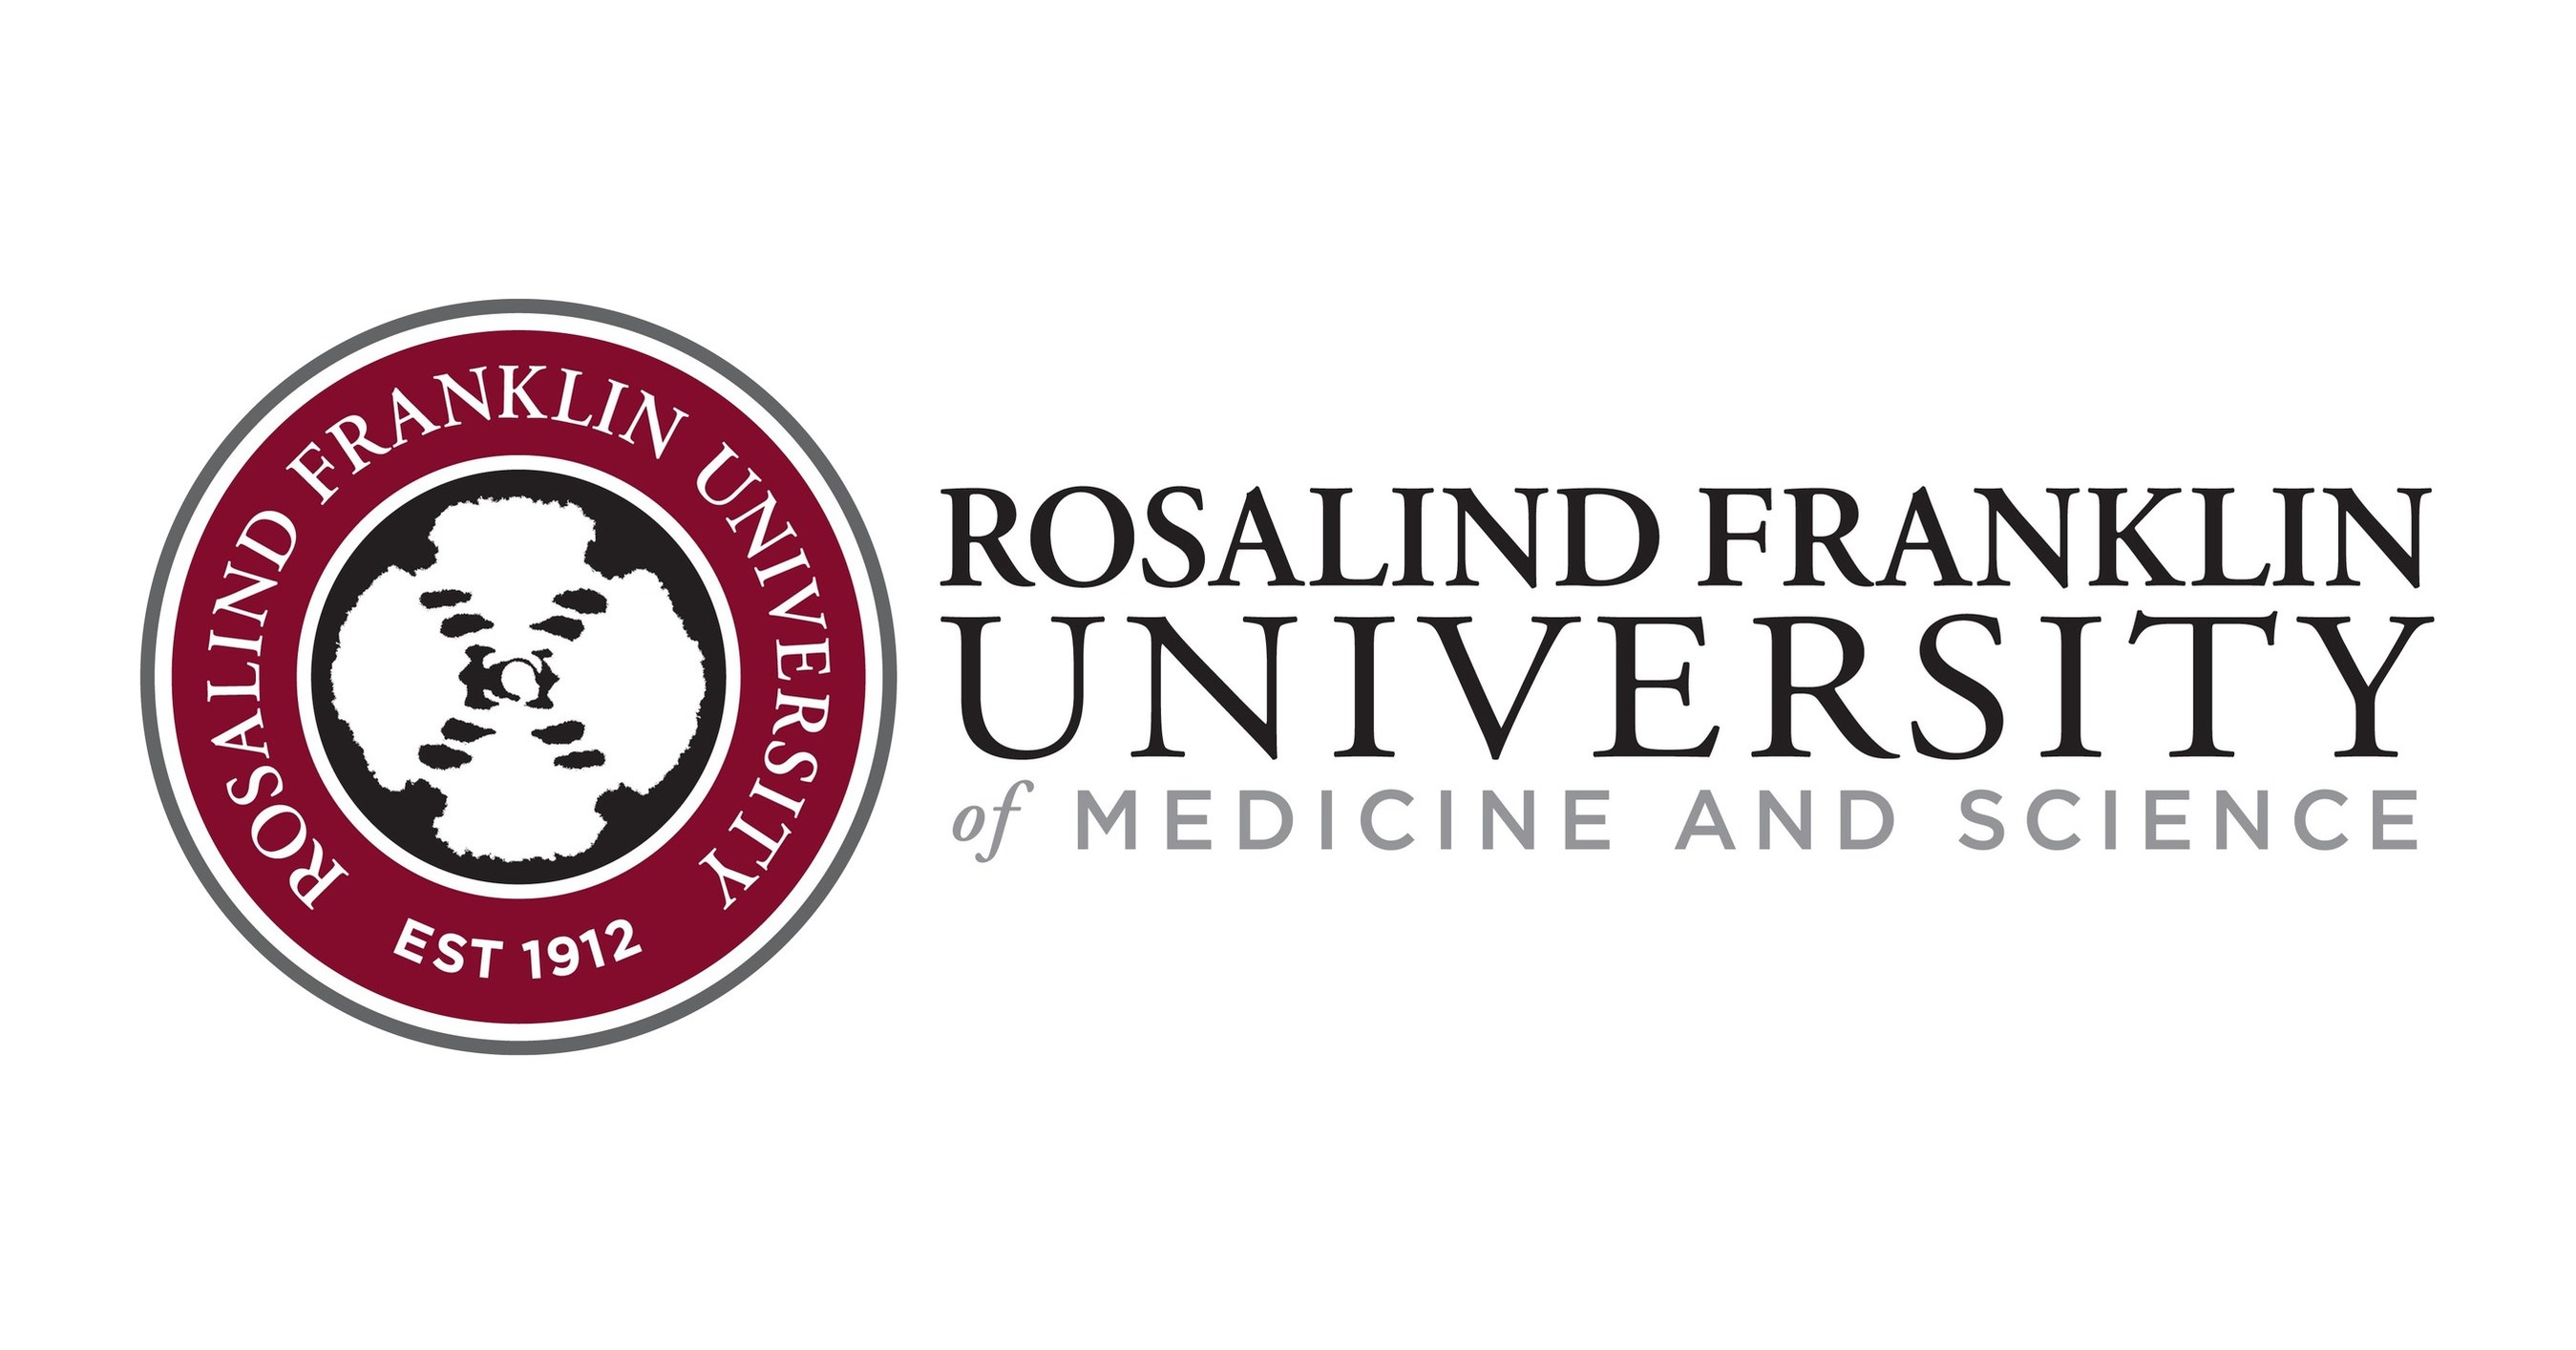  ROSALIND FRANKLIN UNIVERSITY PRESENTED 2022 HARM REDUCTION AWARD BY THE GPF FOUNDATION 